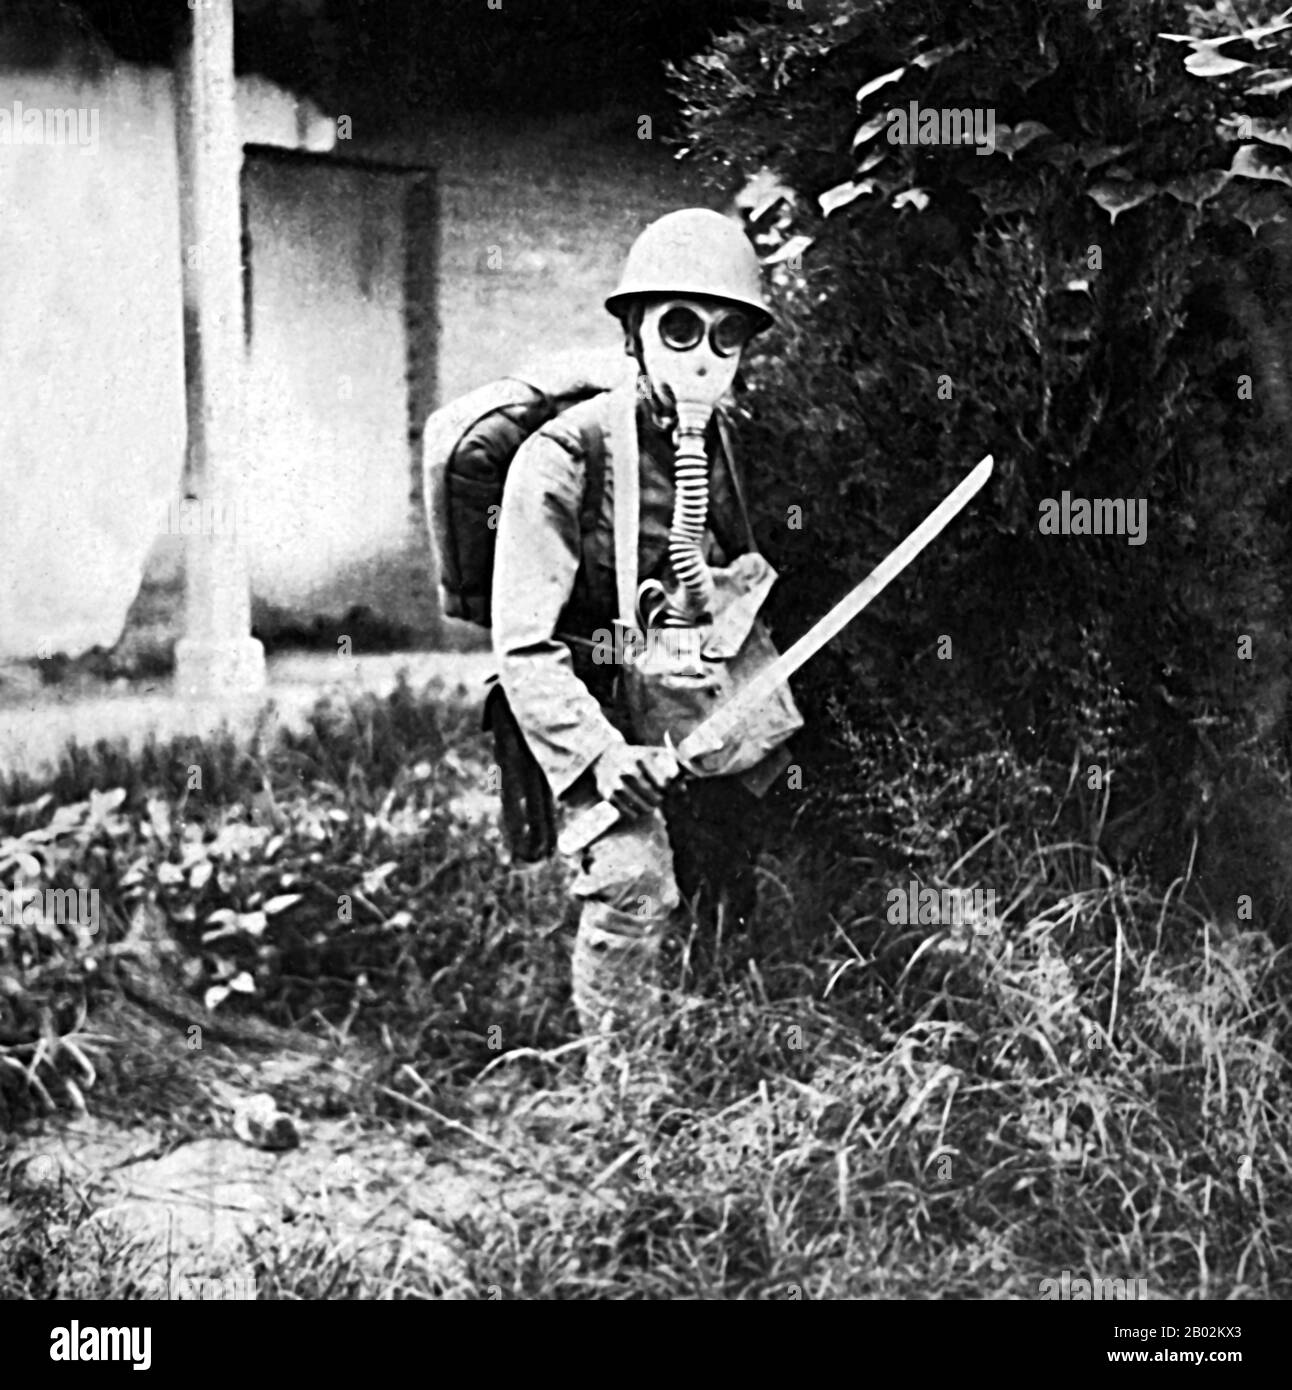 The Second Sino-Japanese War (July 7, 1937 – September 9, 1945) was a military conflict fought primarily between the Republic of China and the Empire of Japan. After the Japanese attack on Pearl Harbor, the war merged into the greater conflict of World War II as a major front of what is broadly known as the Pacific War.  Although the two countries had fought intermittently since 1931, total war started in earnest in 1937 and ended only with the surrender of Japan in 1945. The war was the result of a decades-long Japanese imperialist policy aiming to dominate China politically and militarily an Stock Photo